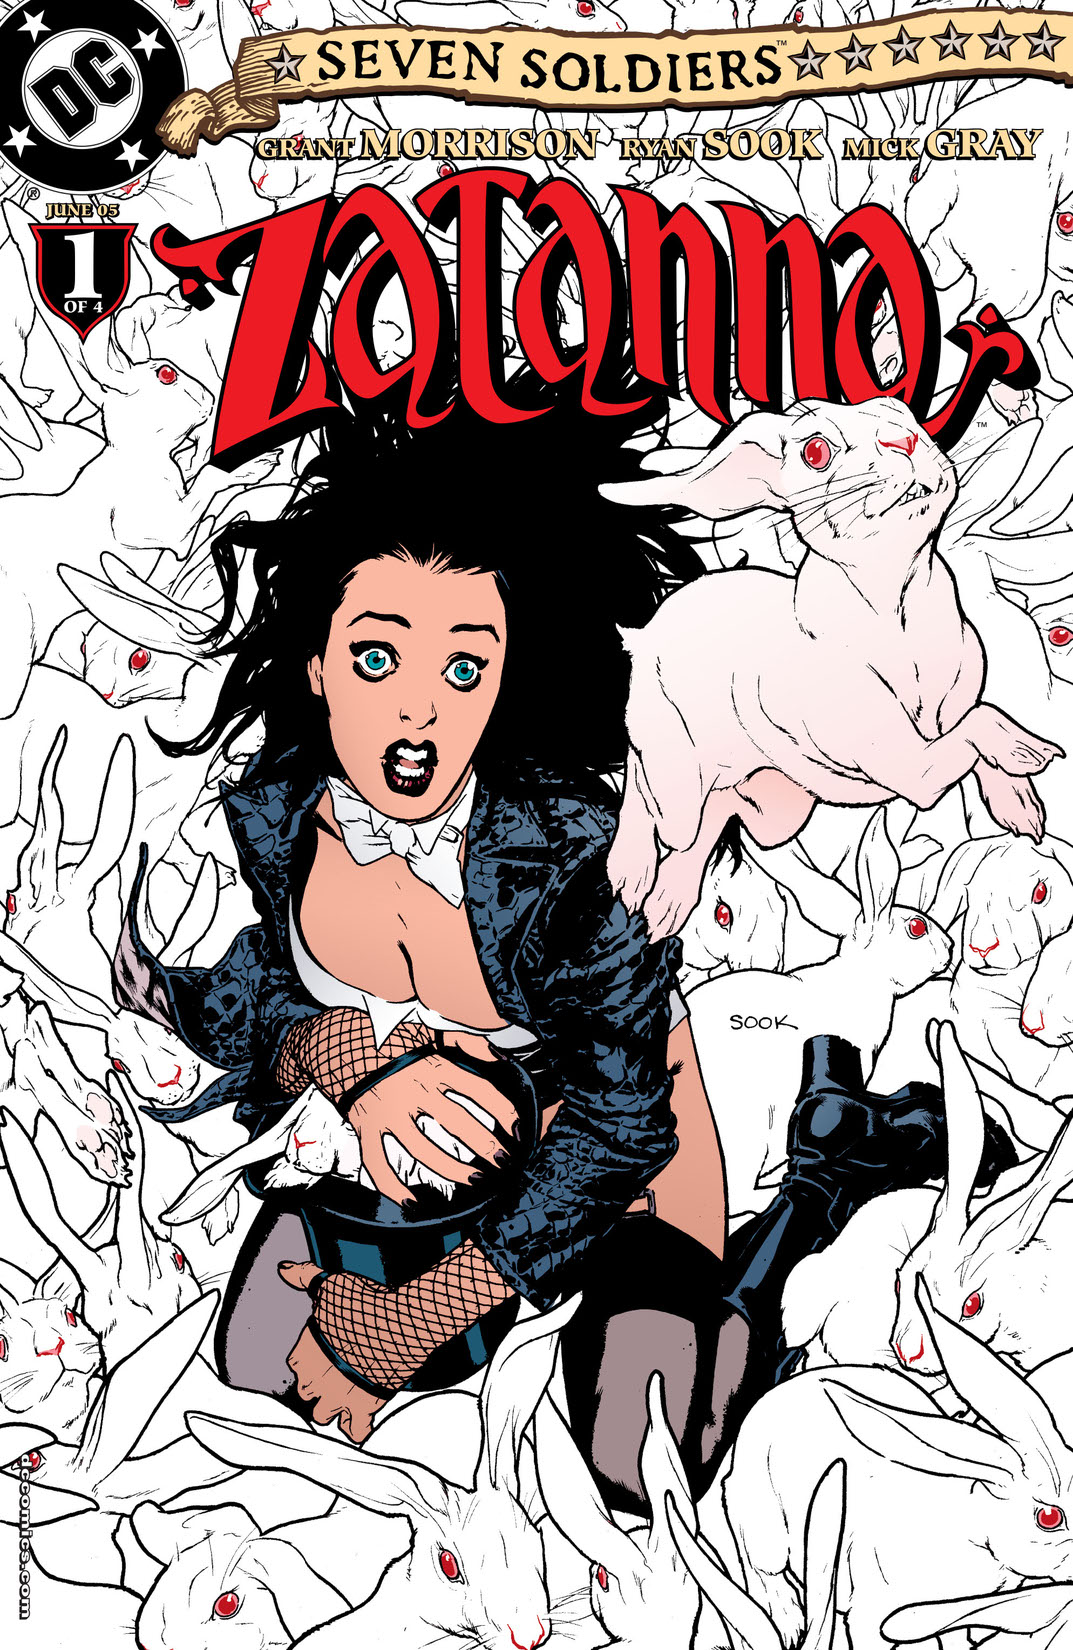 Seven Soldiers: Zatanna #1 preview images